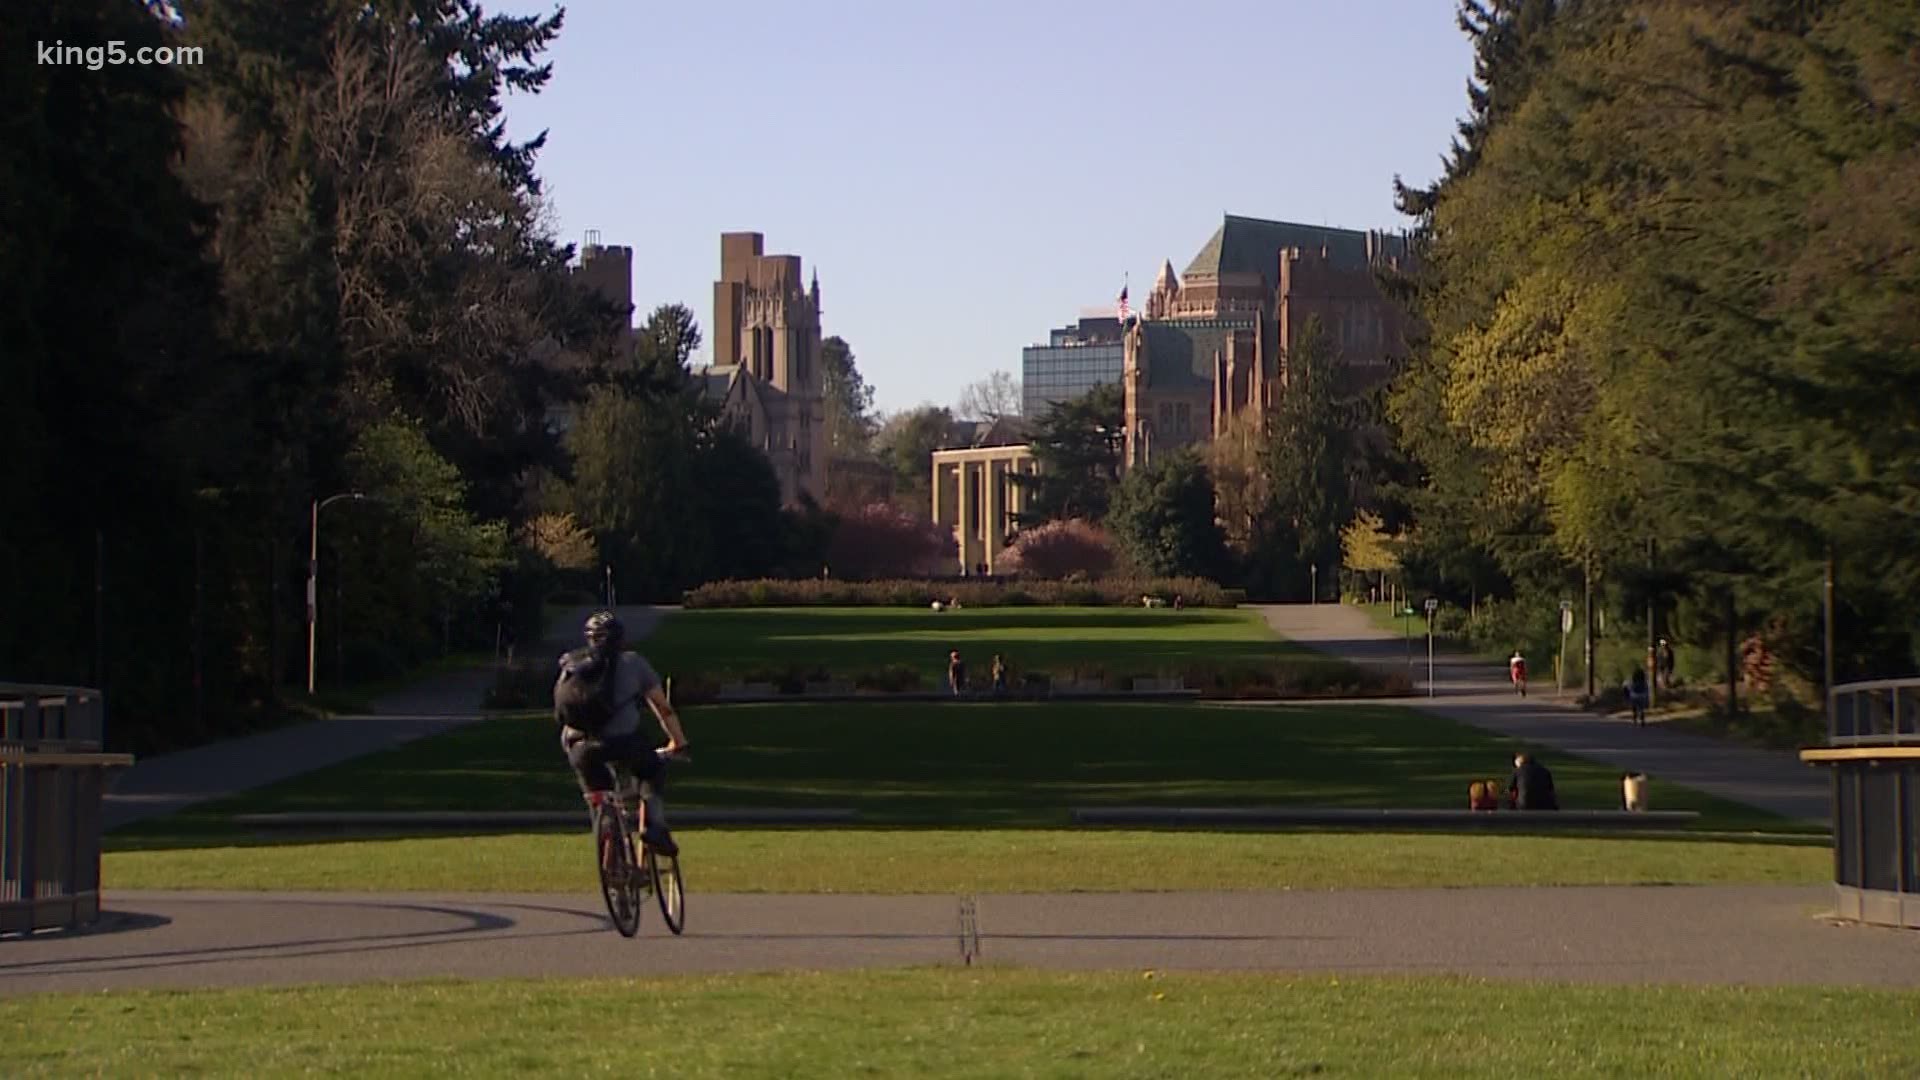 The University of Washington announce it would hold an online event and graduates could participate in next year's commencement ceremonies.